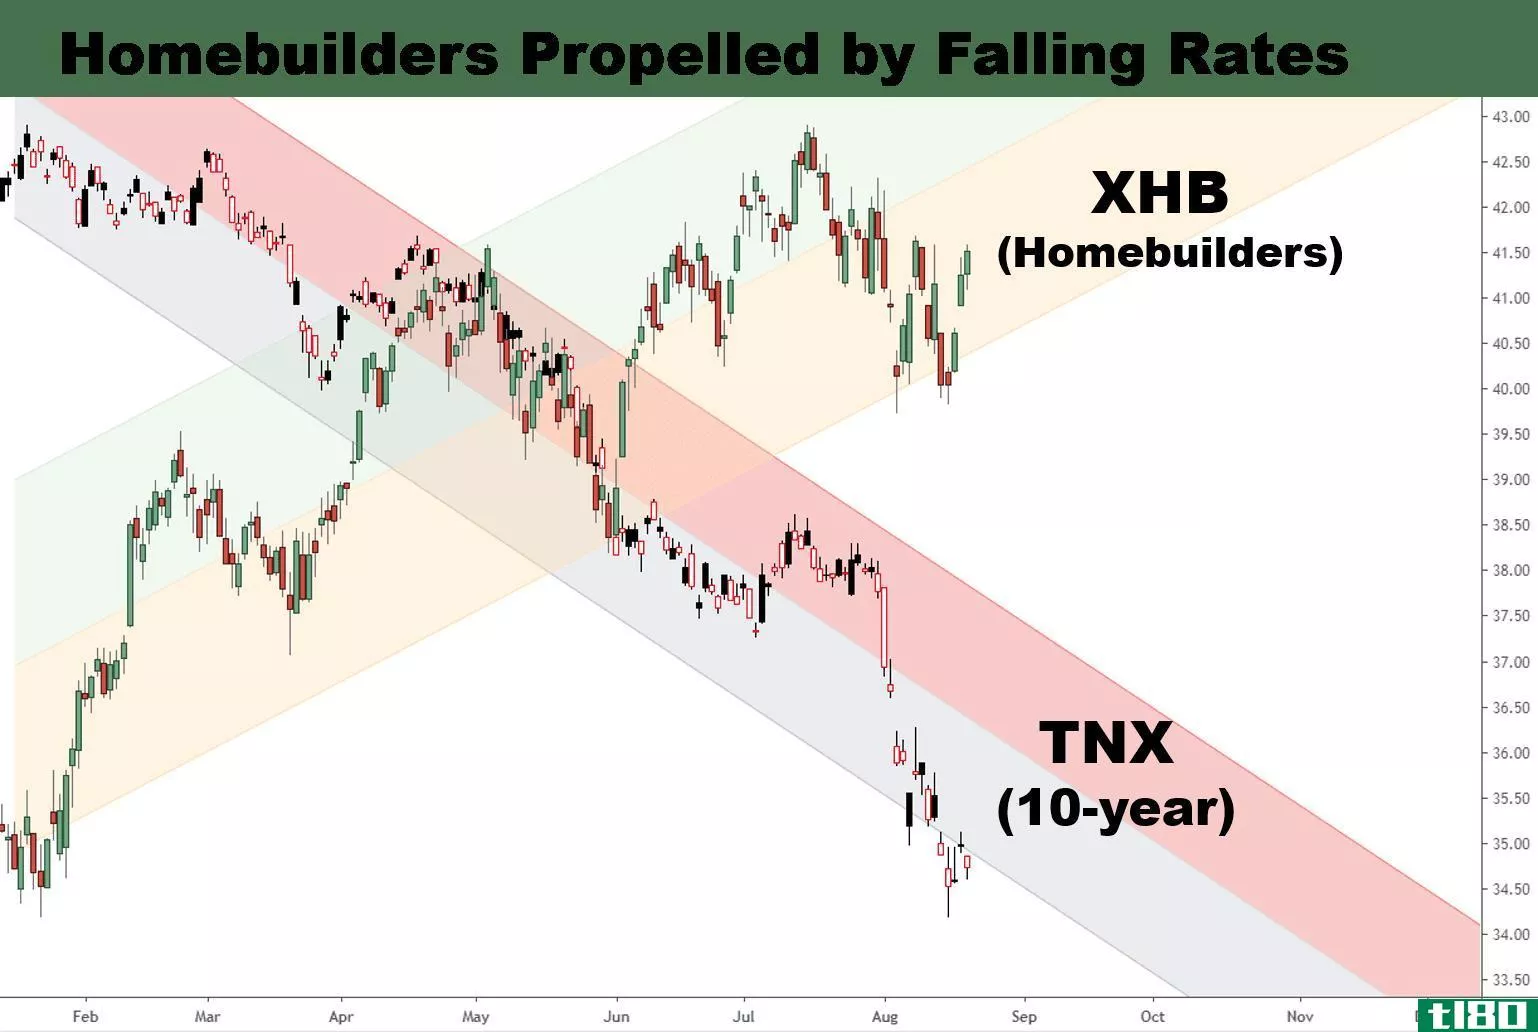 Chart showing the performance of the SPDR S&P Homebuilders ETF (XHB) and the 10-year Treasury yield (TNX)